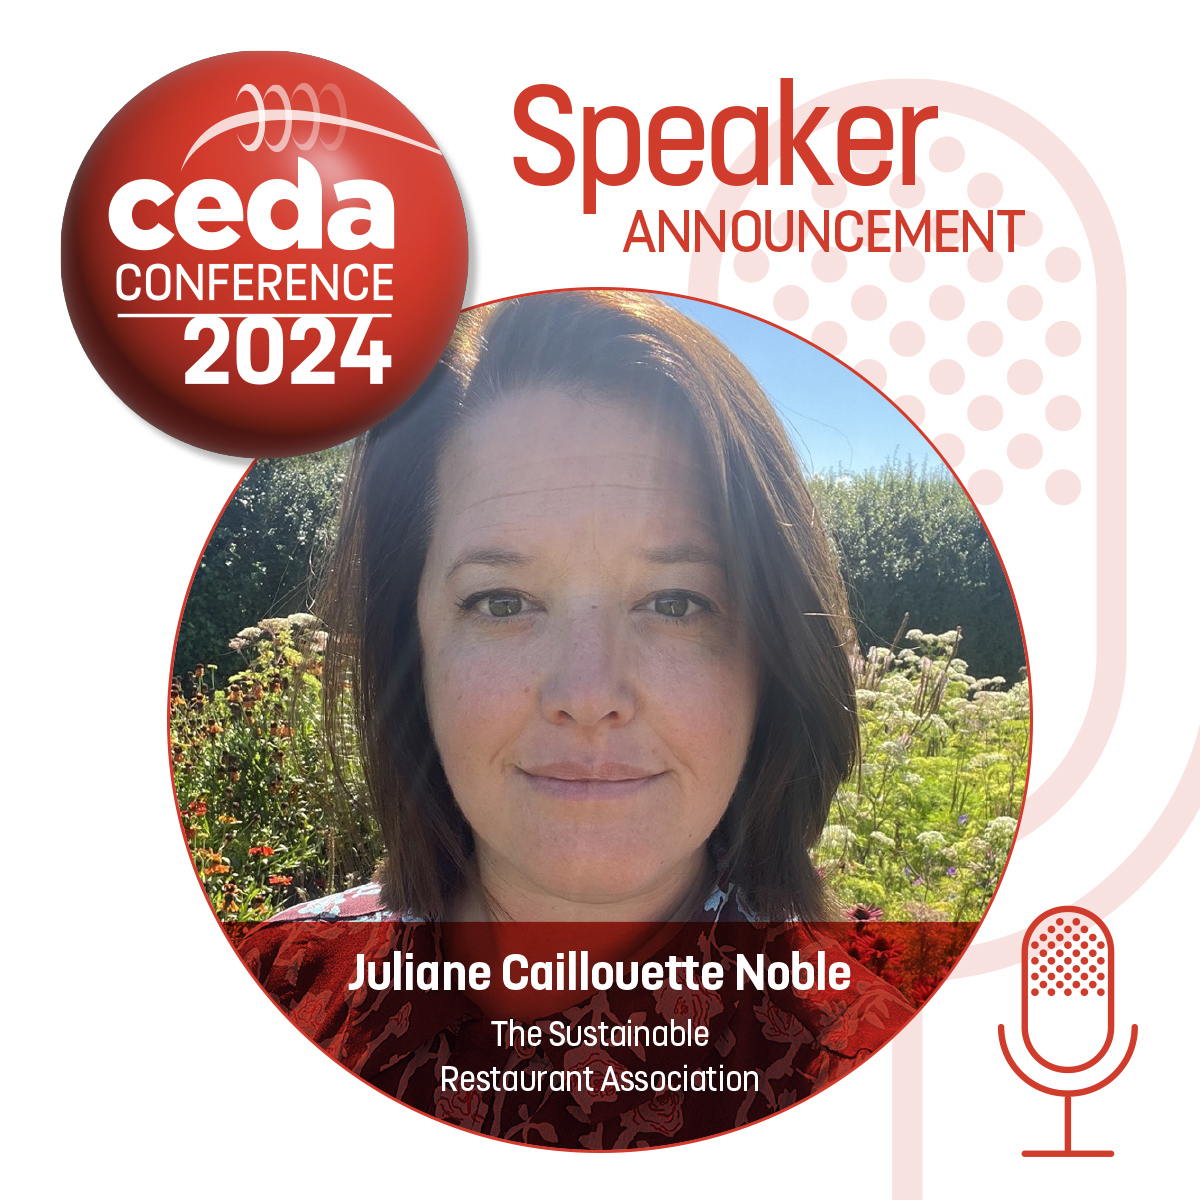 Speaker - Juliane Caillouette Noble - Excellence by Association ✅ Juliane is focused on growing the impact of Food Made Good, the gold Standard for sustainable hospitality, around the world. Read more here: loom.ly/43lXOeg